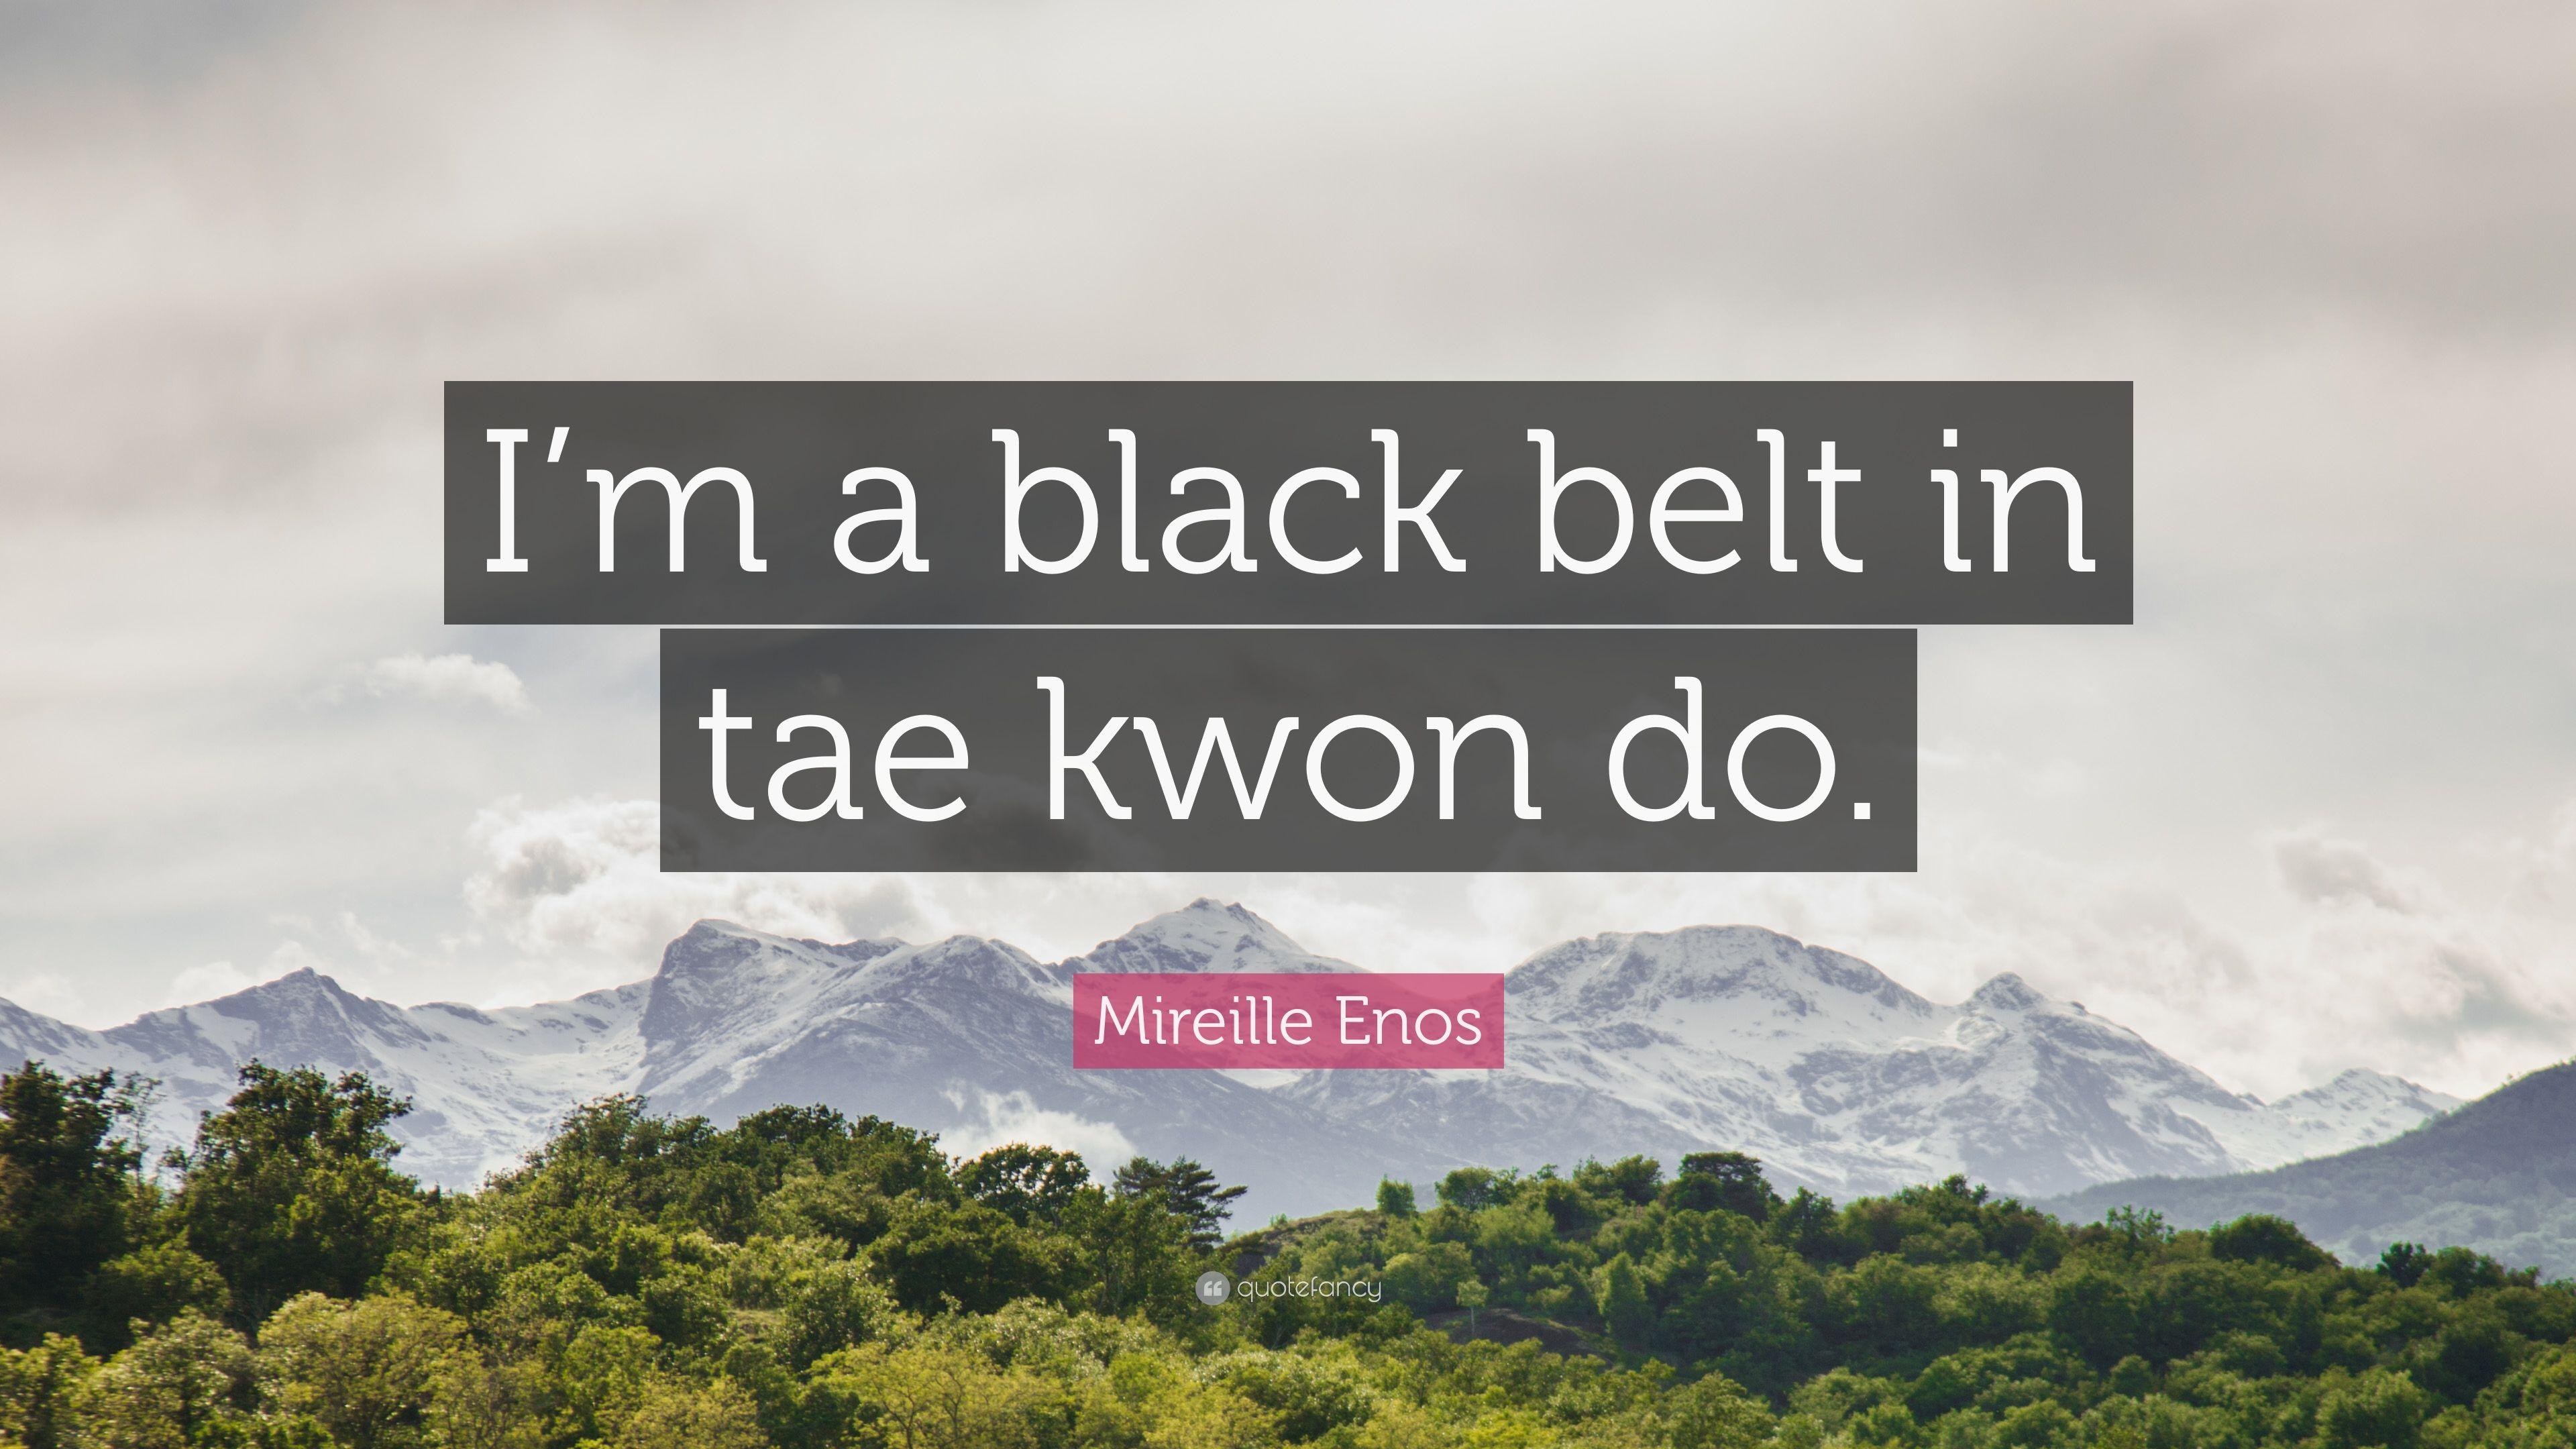 Mireille Enos Quote: “I'm a black belt in tae kwon do.” 7